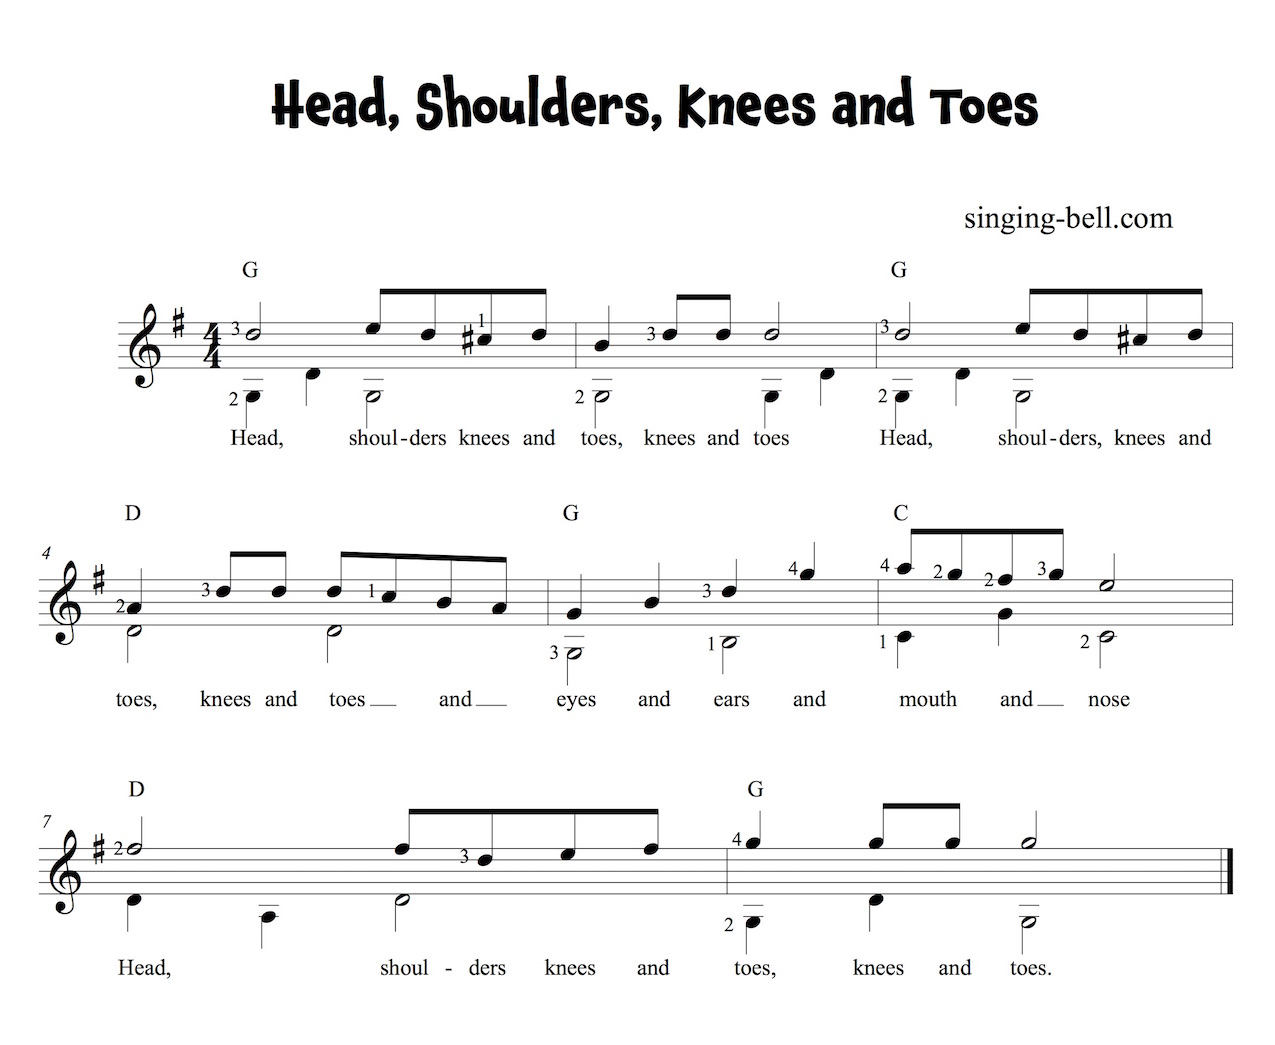 Head shoulders knees and toes sheet music